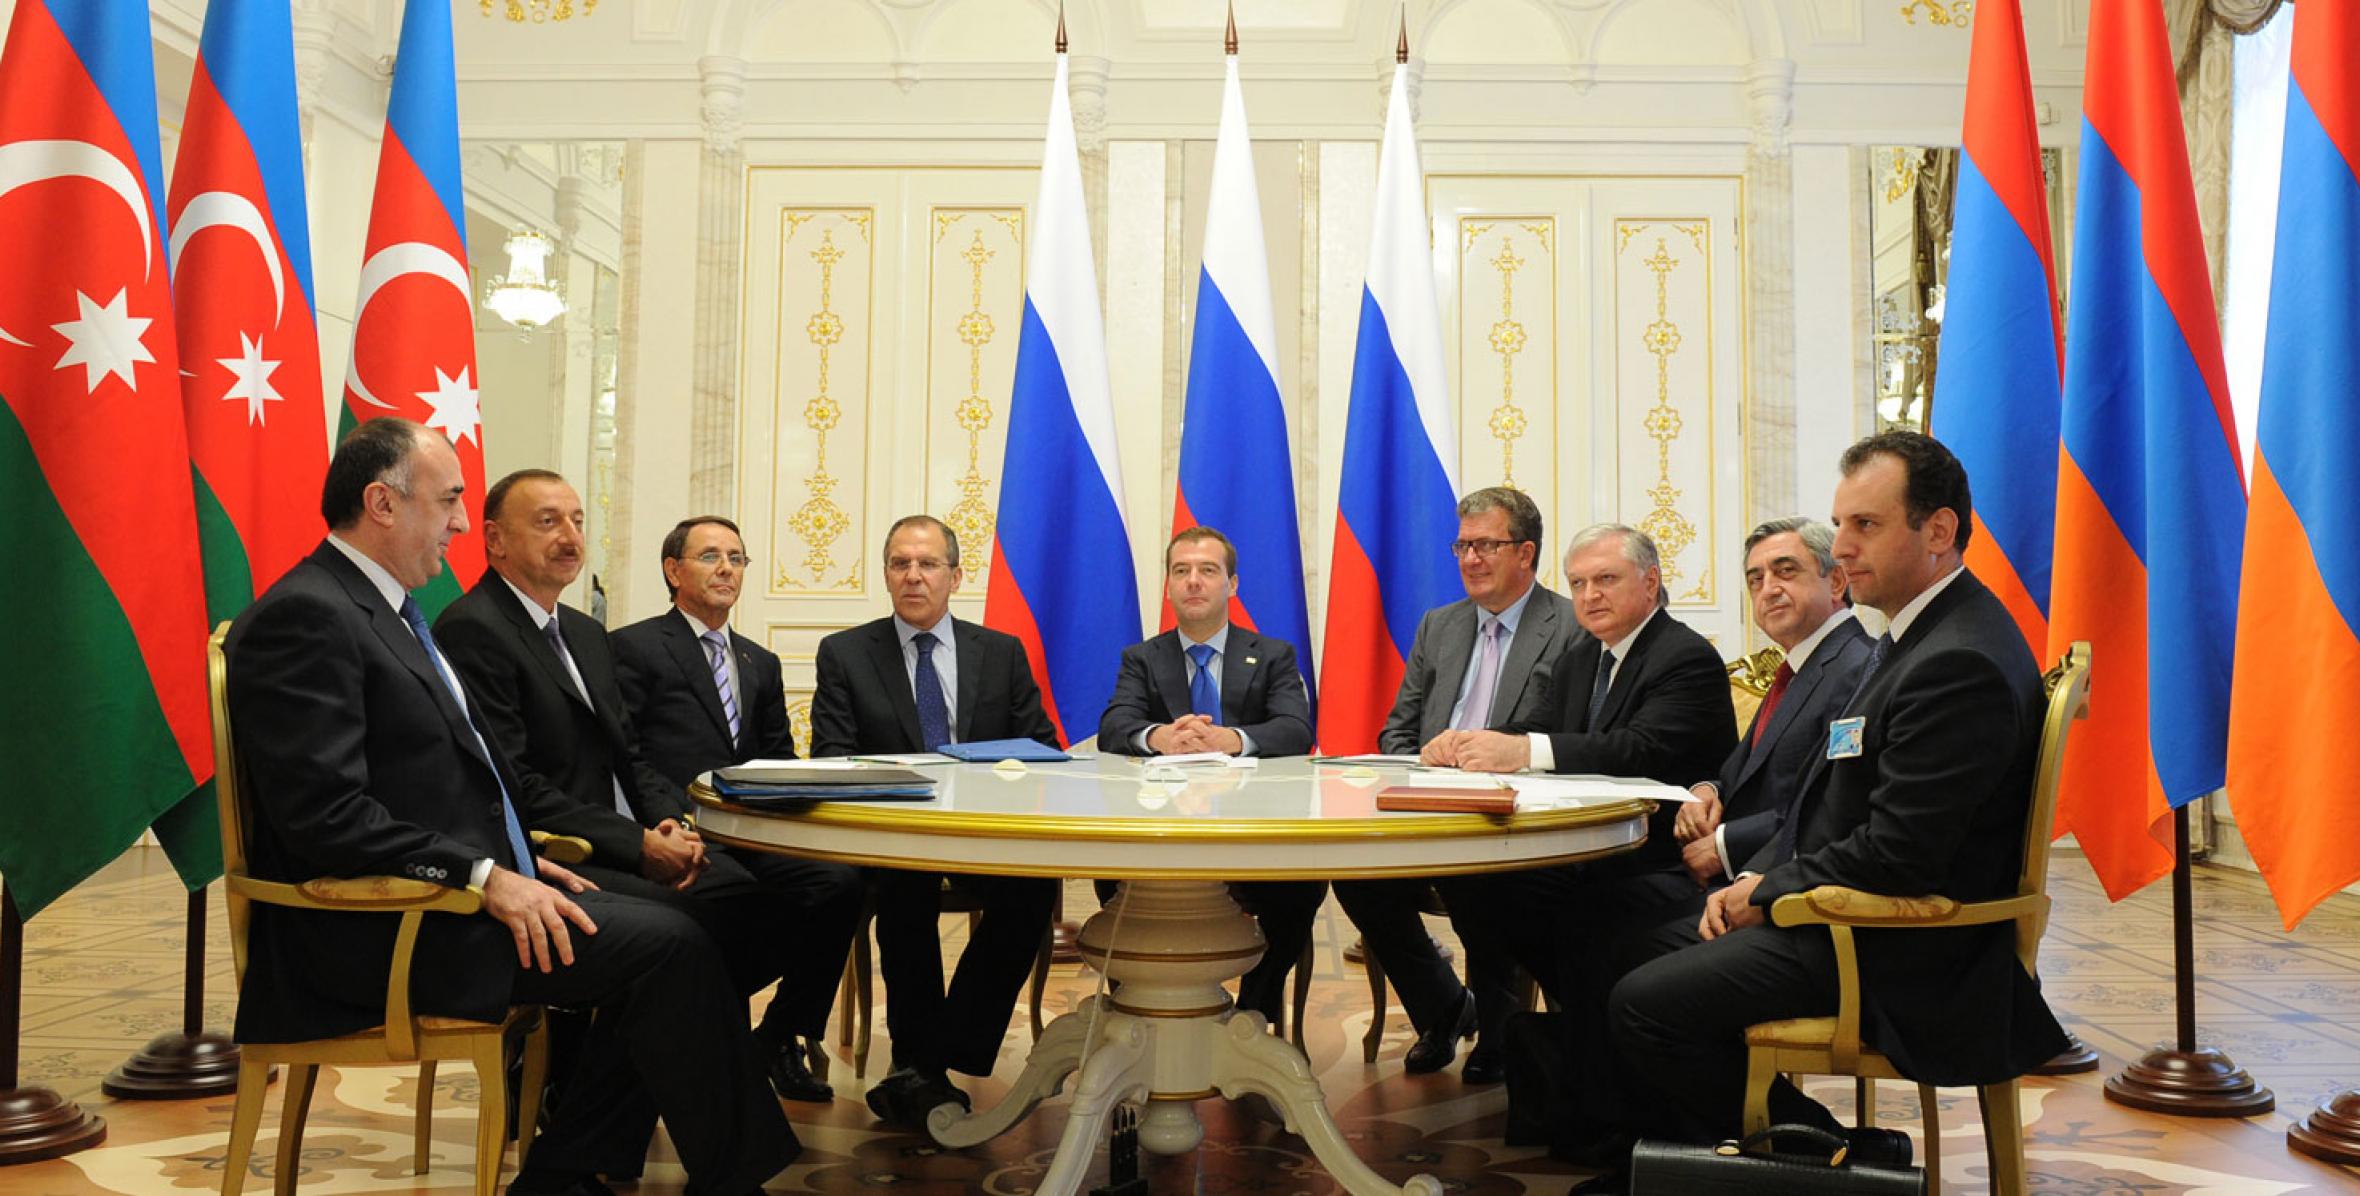 Joint meeting of the Presidents of Azerbaijan, Russia and Armenia was held in Kazan